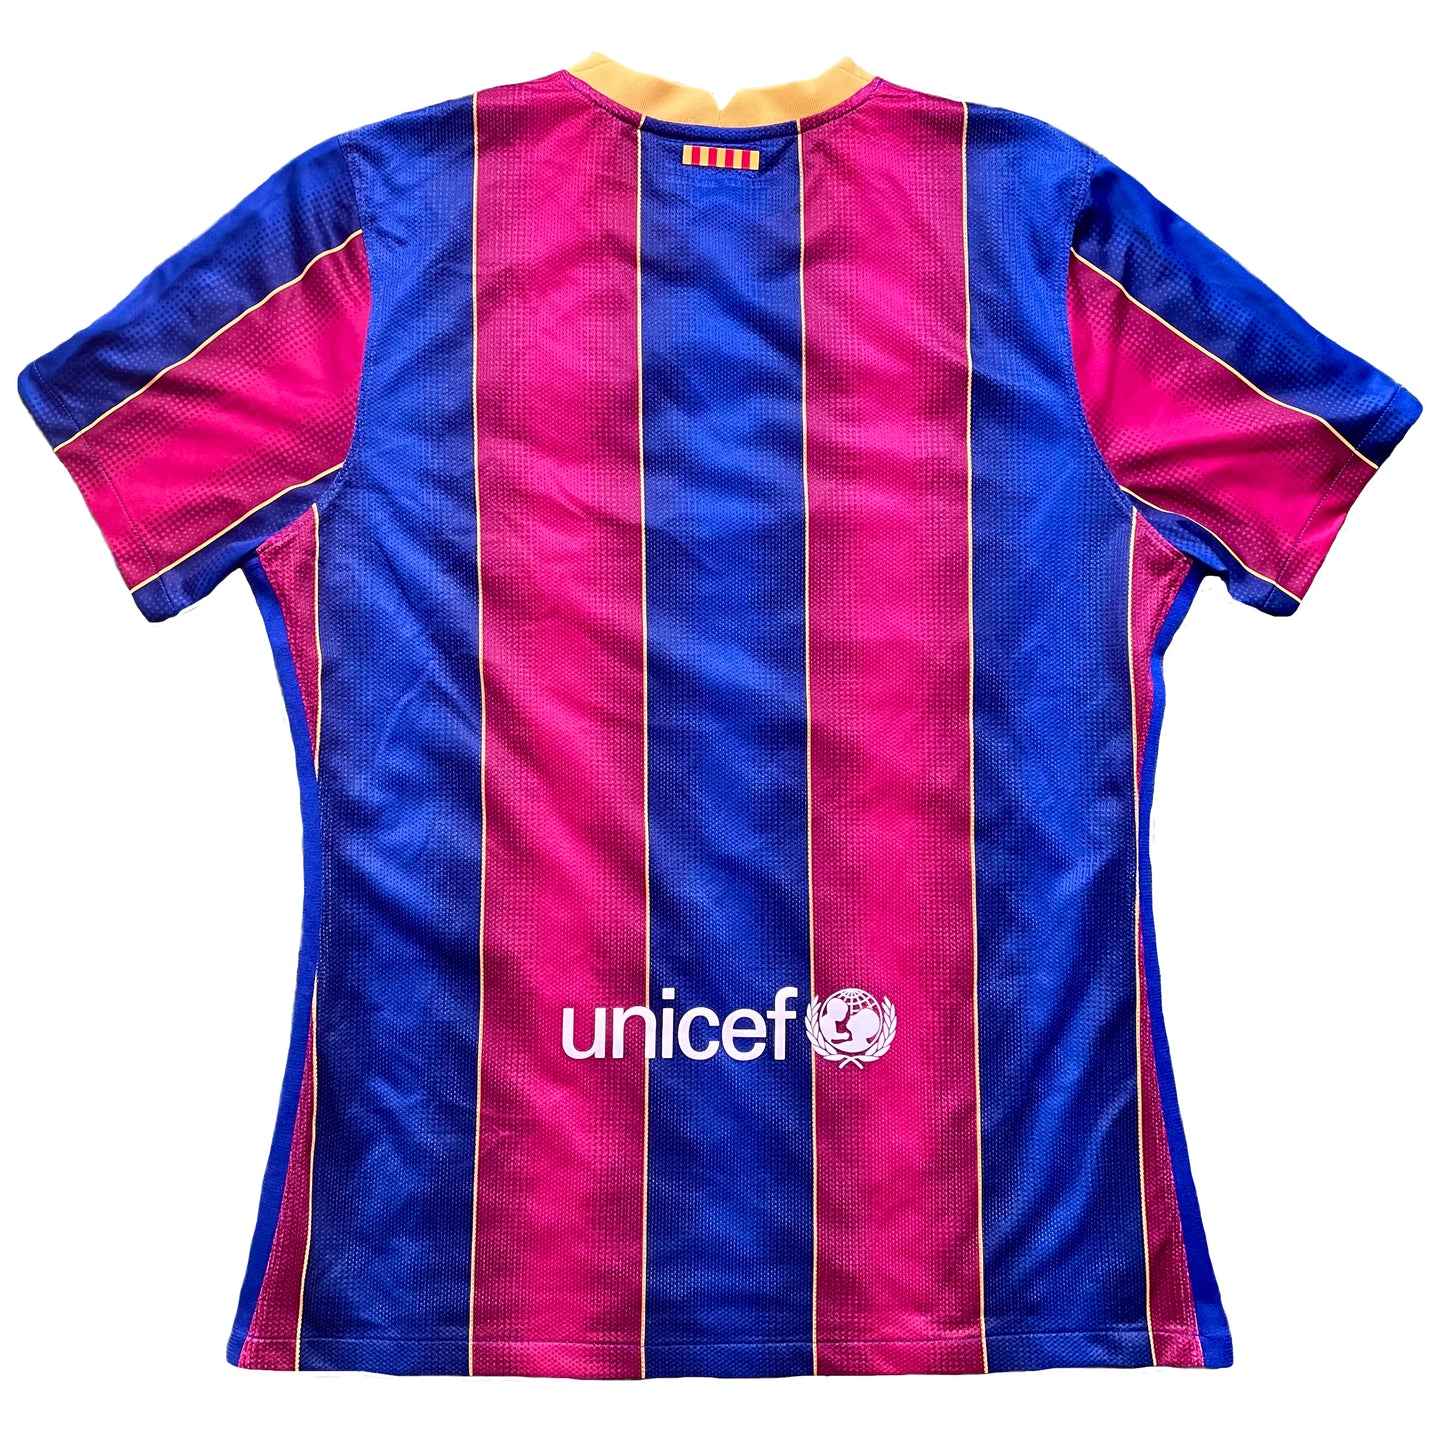 2020-2021 FC Barcelona youth team player issue home shirt (XL)